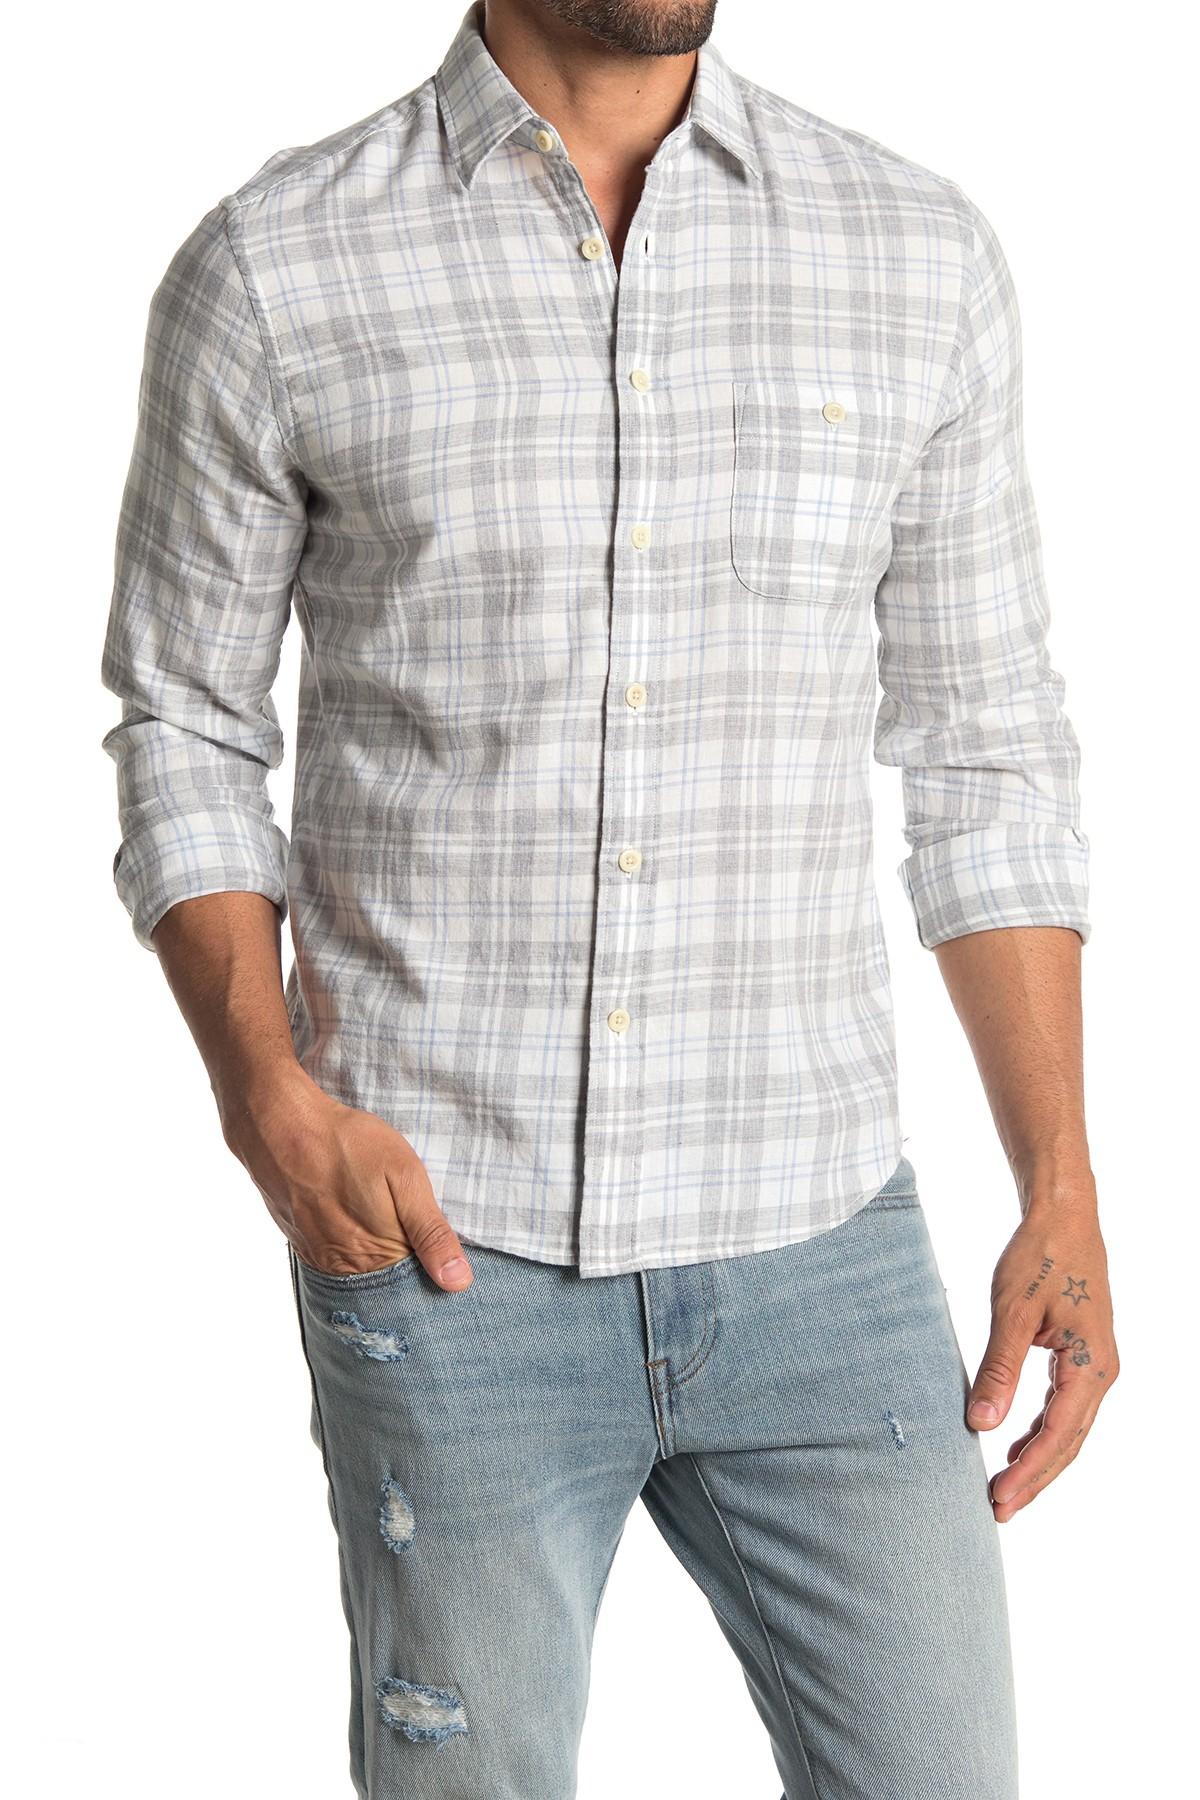 Faherty Brand Everyday Plaid Slim Fit Shirt in Gray for Men - Lyst